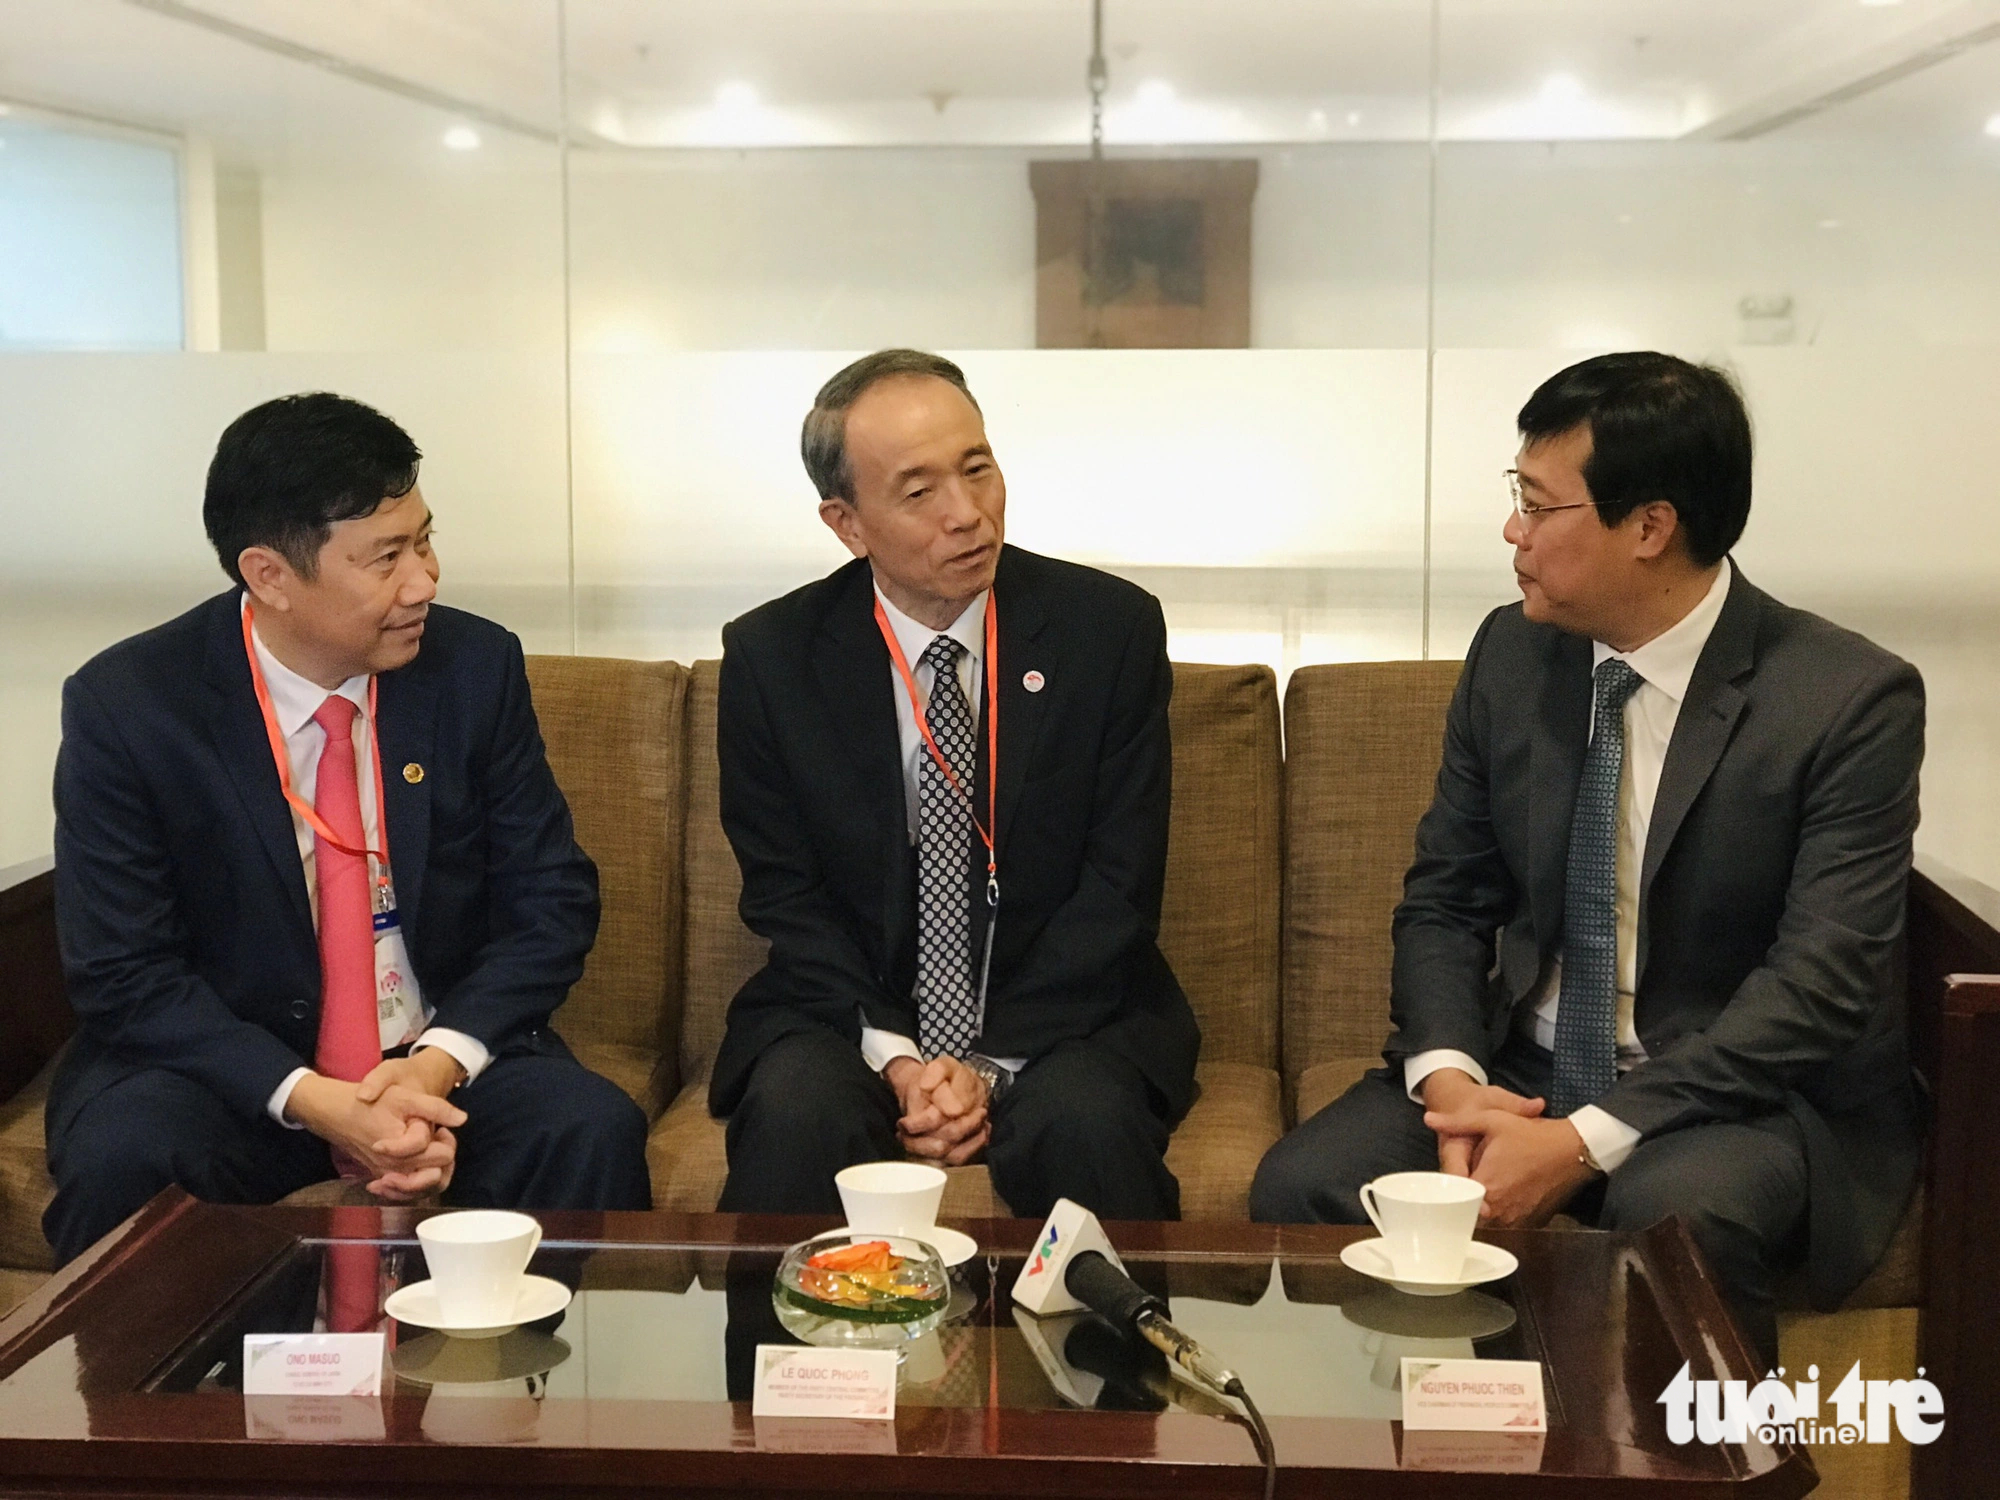 Le Quoc Phong (R, 1st), chief of the Dong Thap Provincial Party Committee; Pham Thien Nghia (L, 1st), chairman of the Dong Thap Province administration chat with Japanese Consul General in Ho Chi Minh City Masuo Ono on the sidelines of the conference. Photo: Dang Tuyet / Tuoi Tre